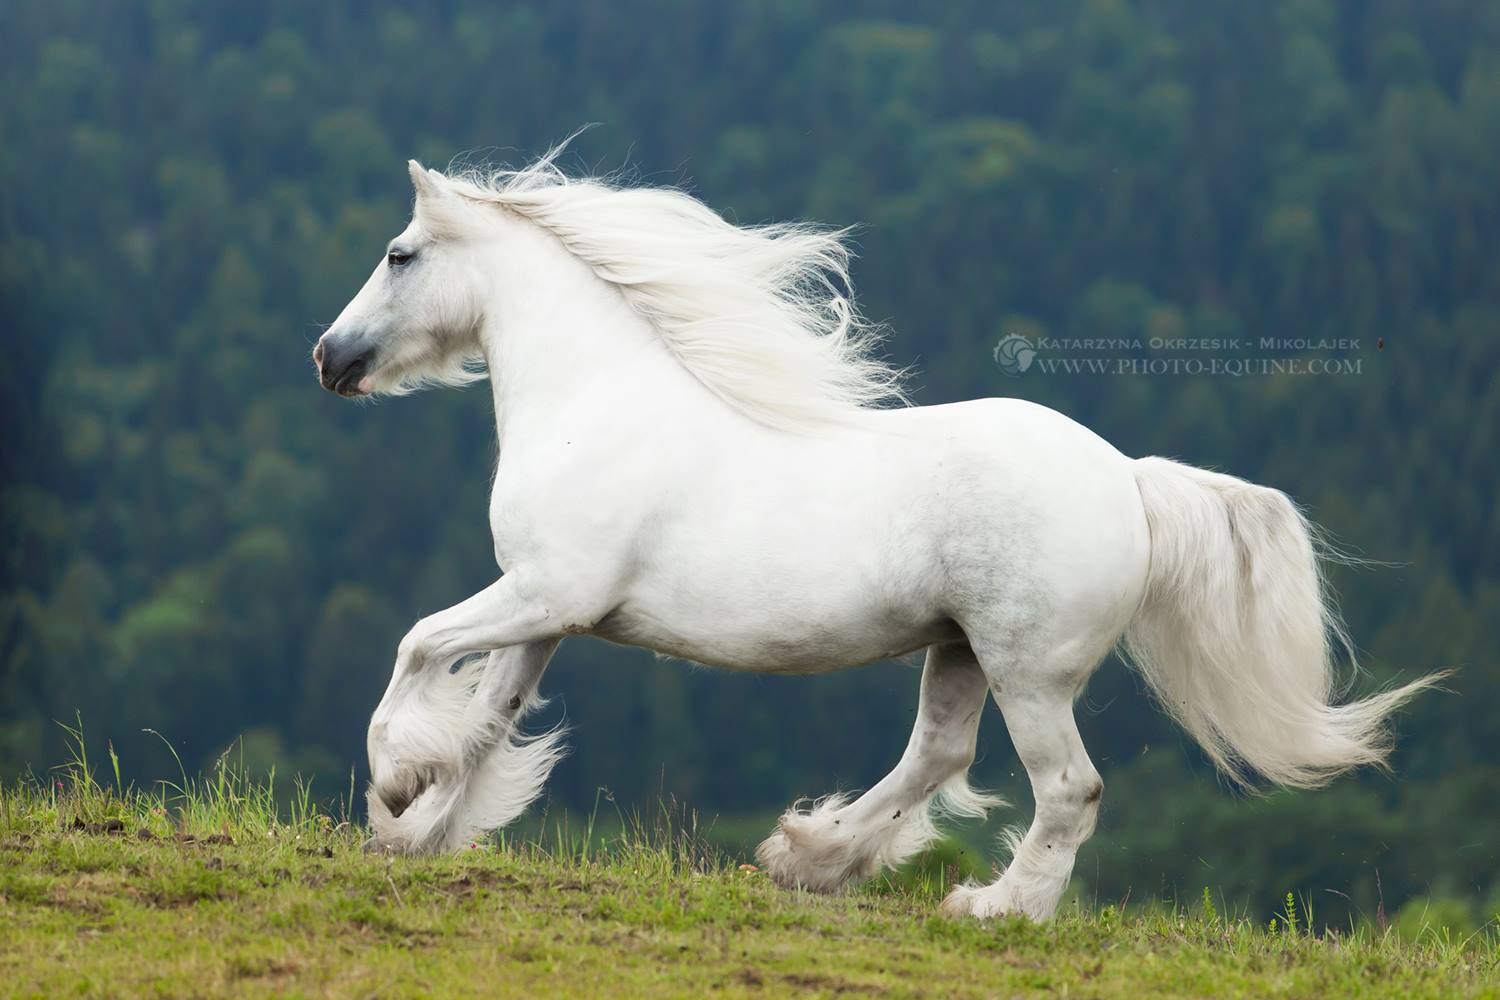 Blue and White Gypsy Cob